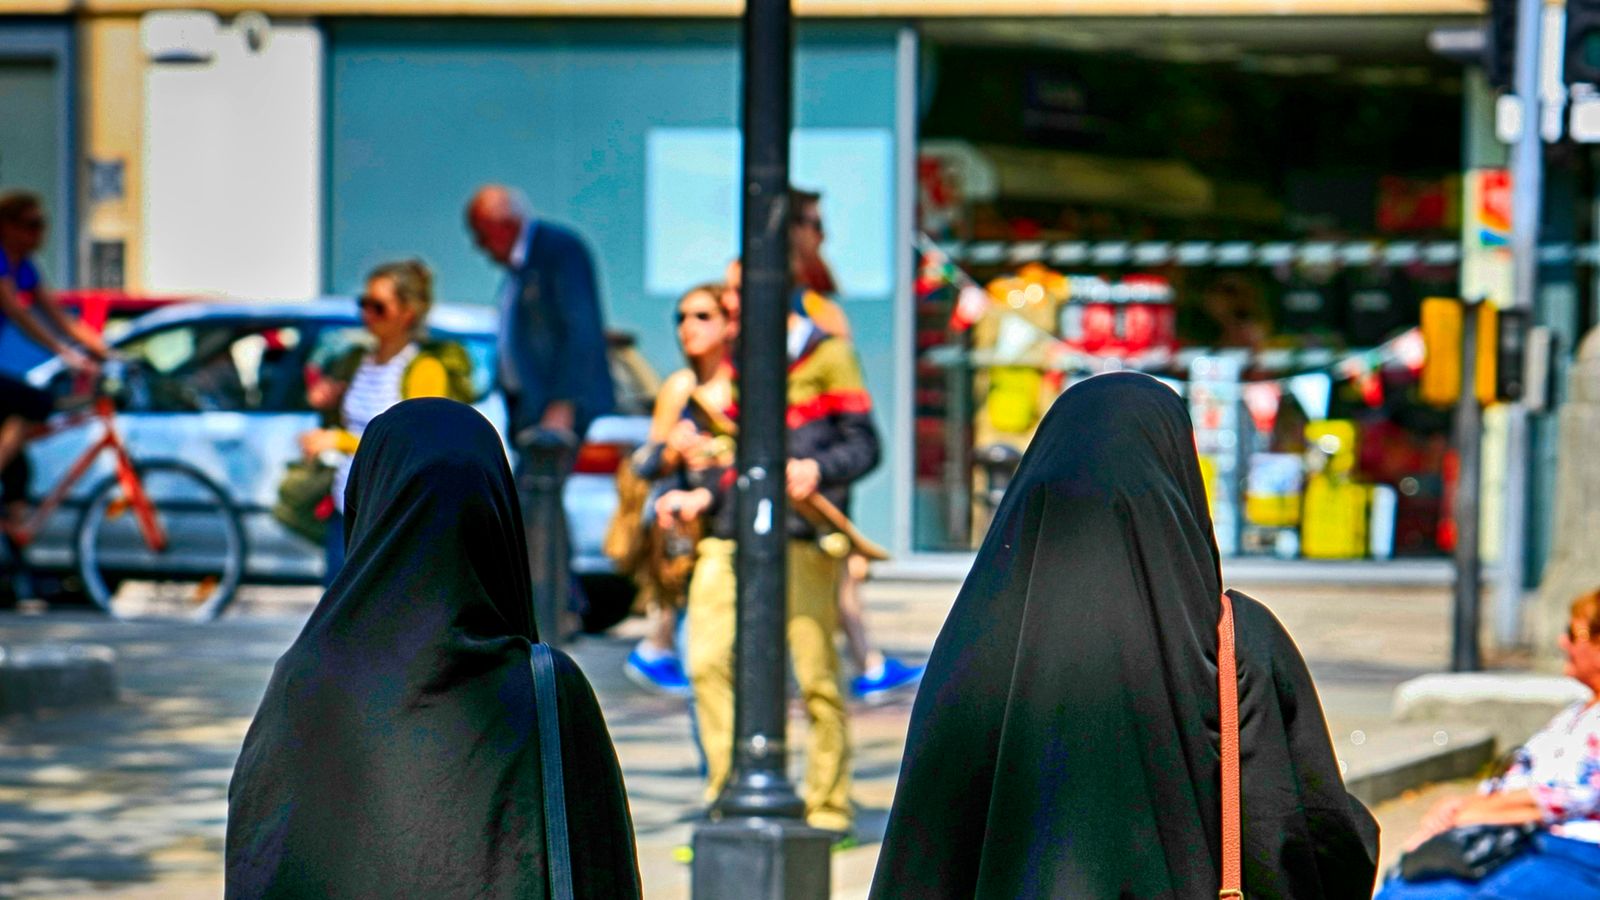 Sky Data poll: Comparing women who wear burkas to bank robbers 'not ...